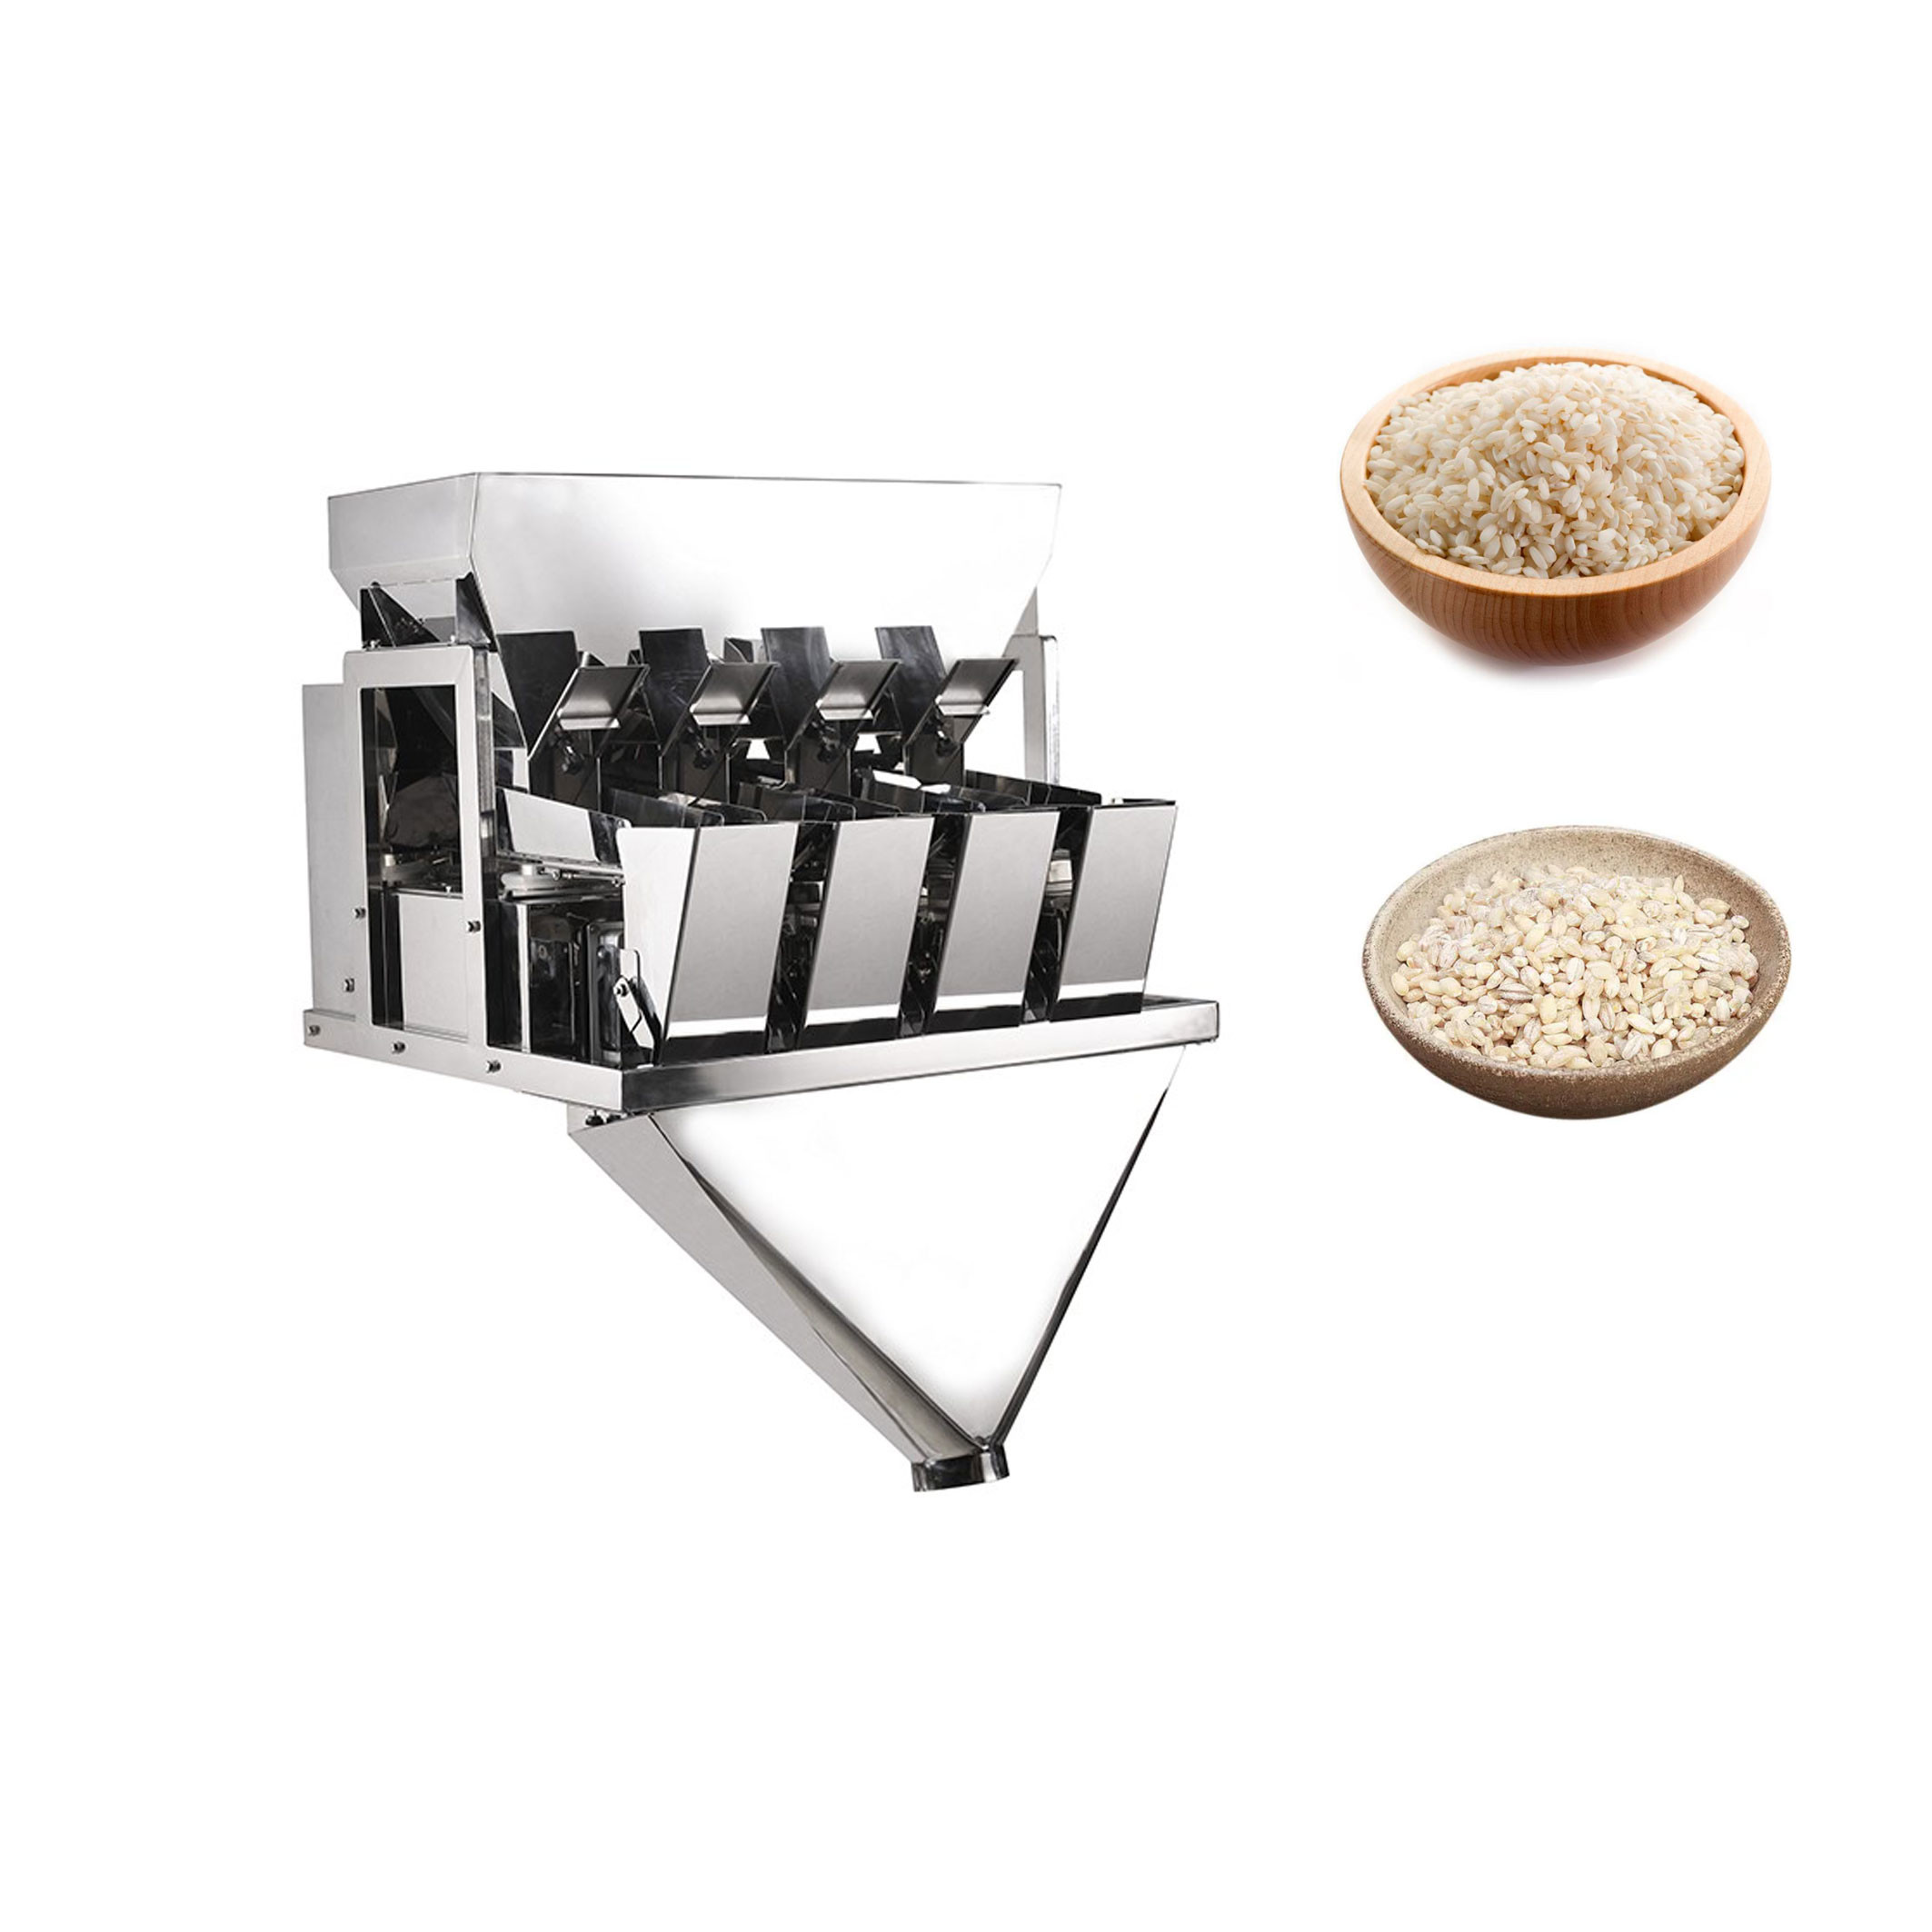 Automatic Beans Grain 4 Heads Linear Weigher Packing Machine 1000g 2kg